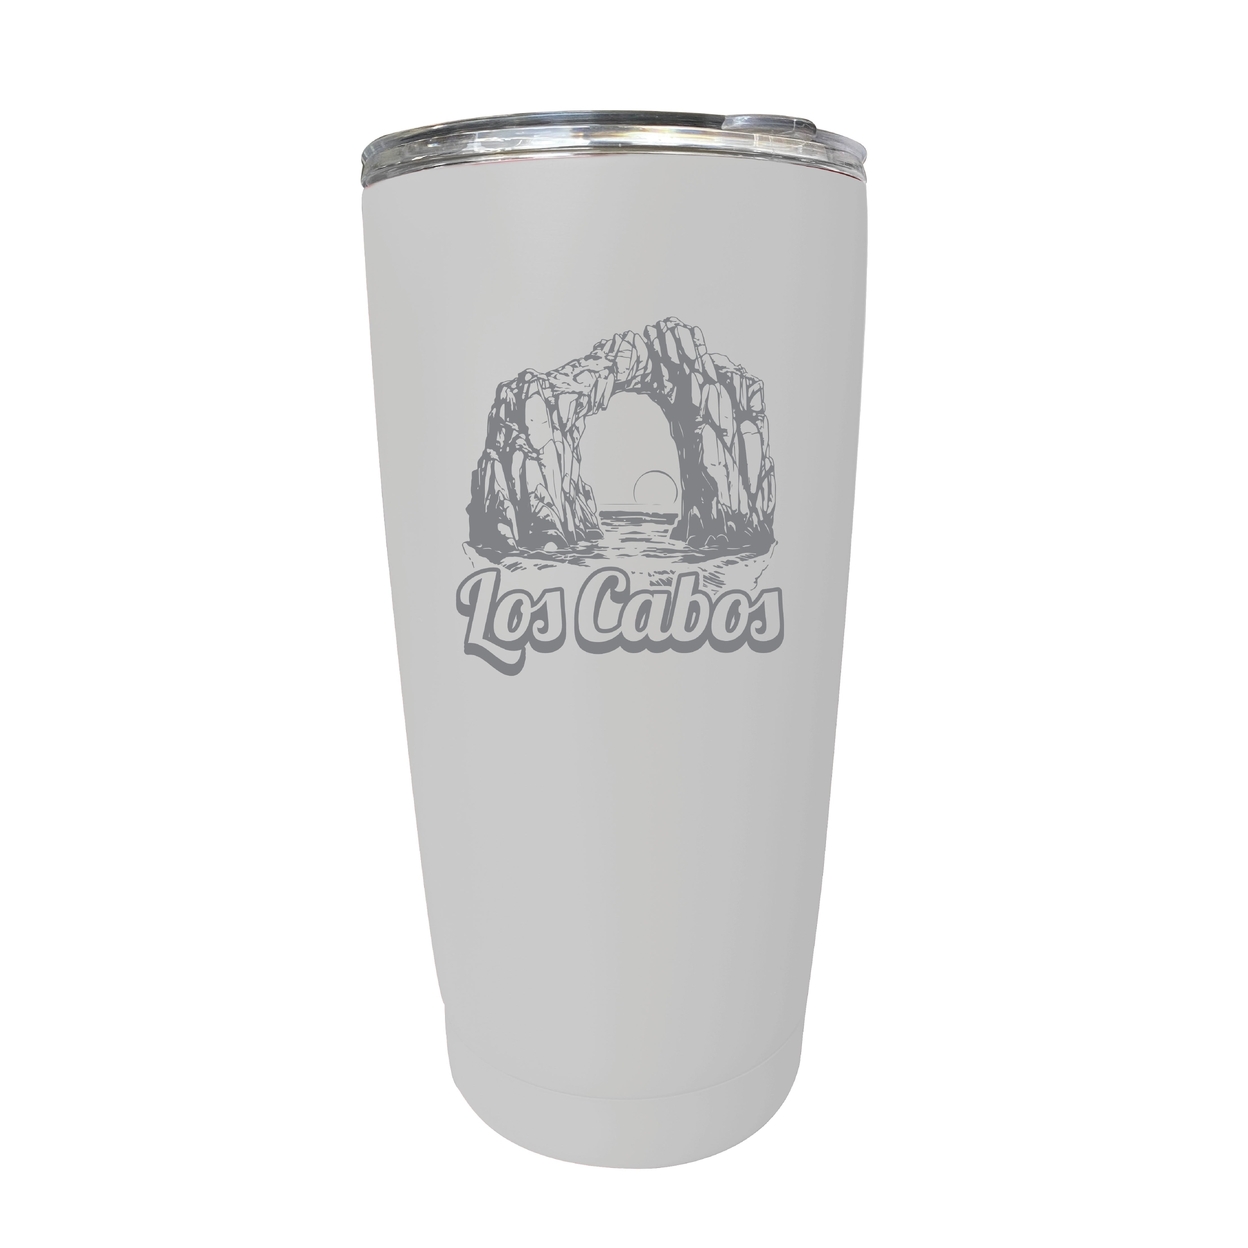 Los Cabos Mexico Souvenir 16 Oz Engraved Stainless Steel Insulated Tumbler - Red,,Single Unit